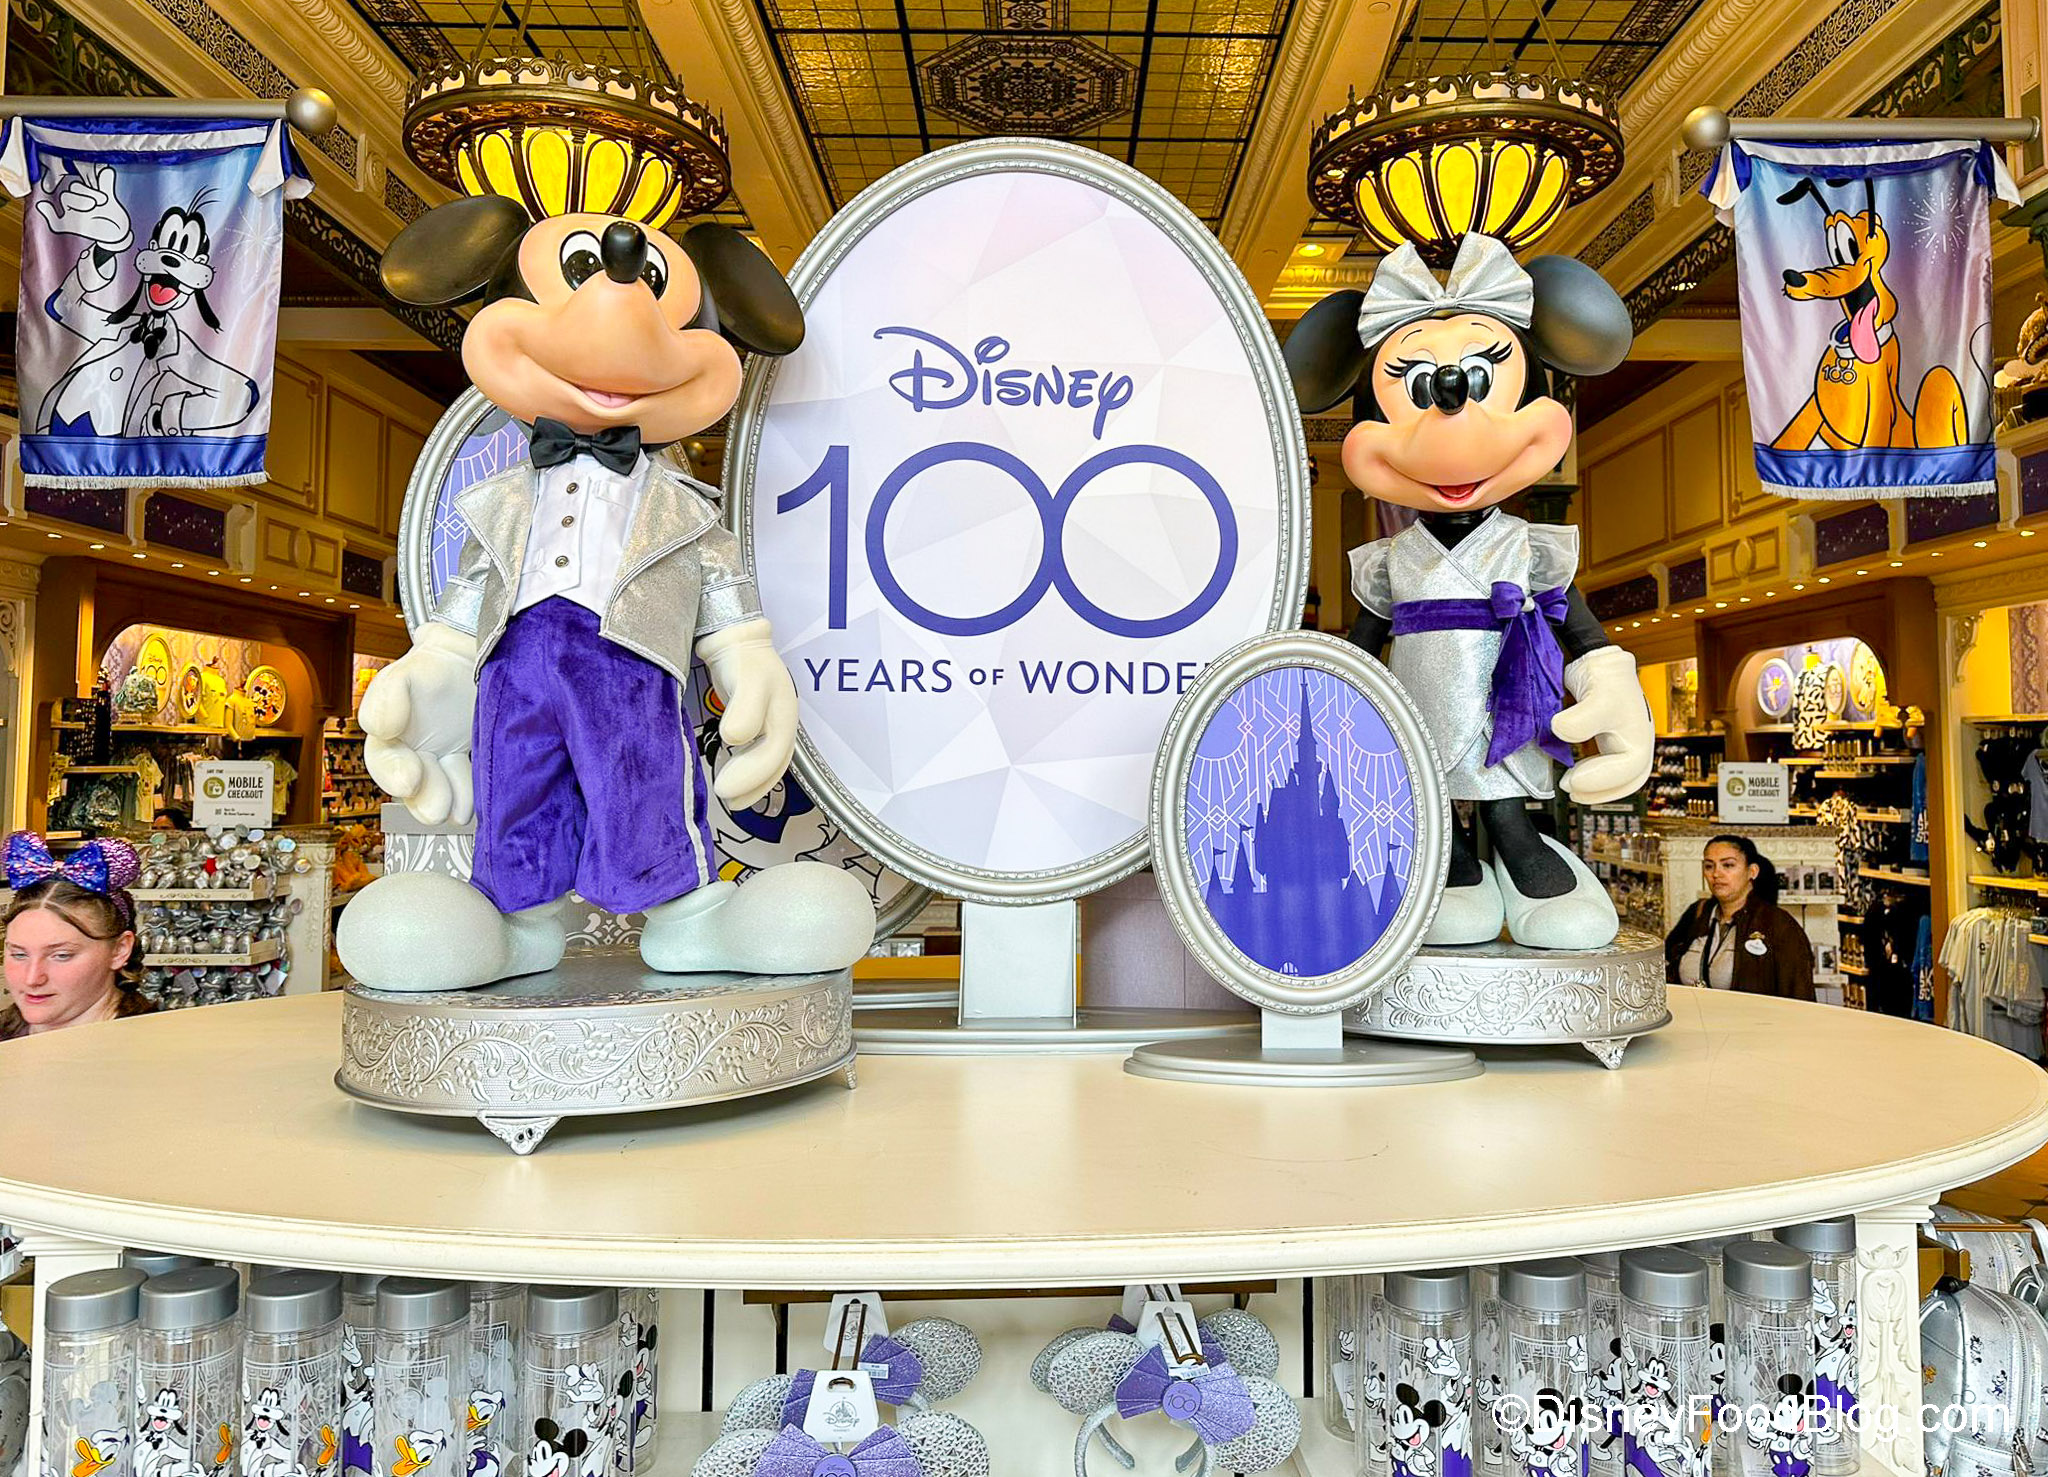 Full List (With Prices) of the Disney 100 Years of Wonder Merchandise  Collection at Walt Disney World - WDW News Today